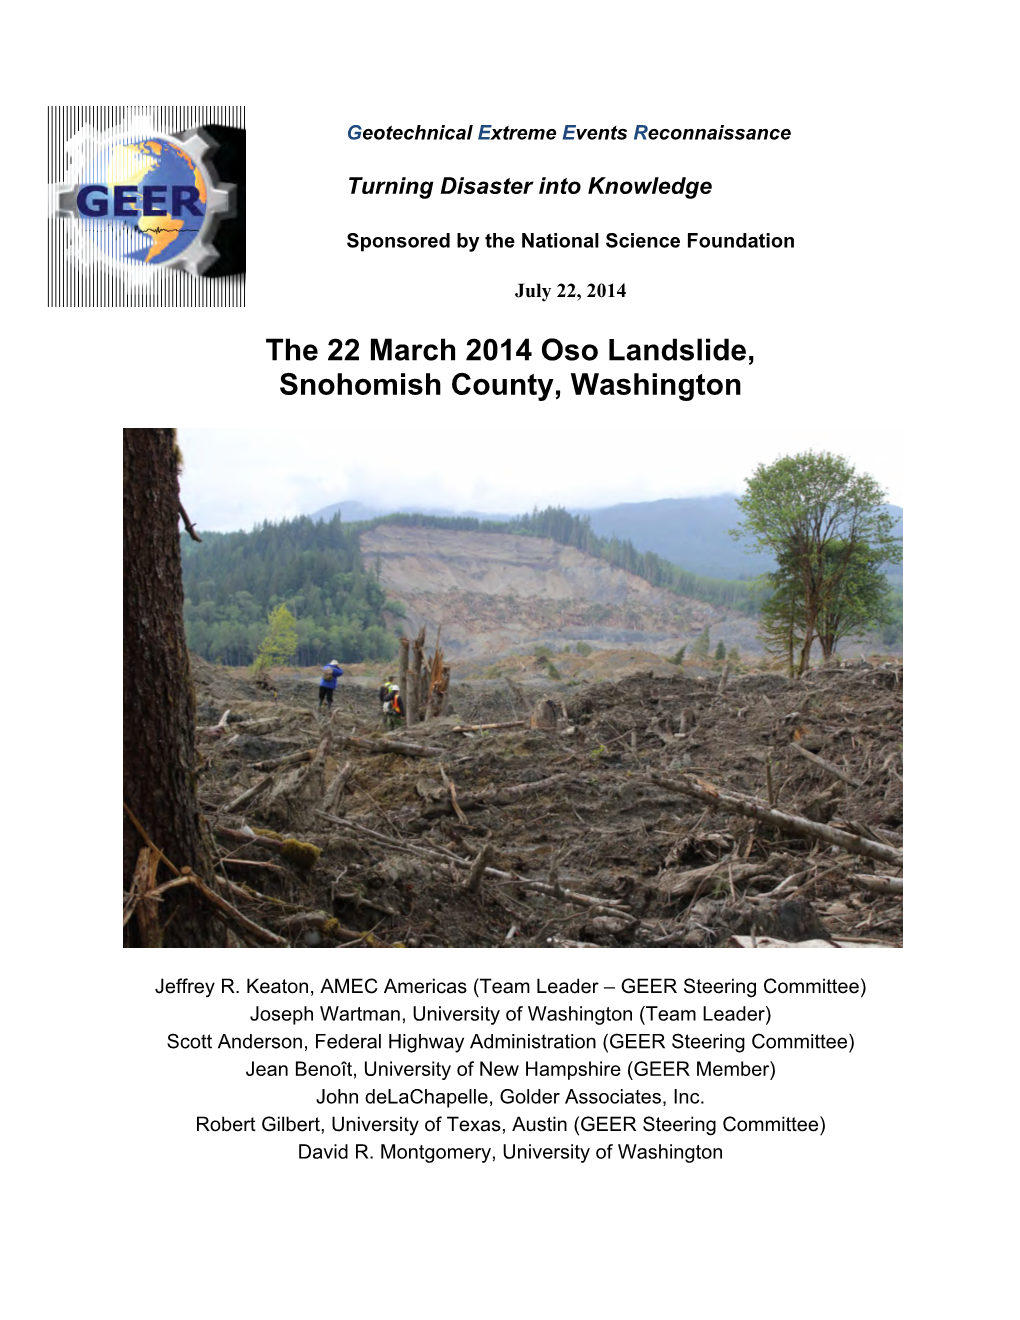 The 22 March 2014 Oso Landslide, Snohomish County, Washington